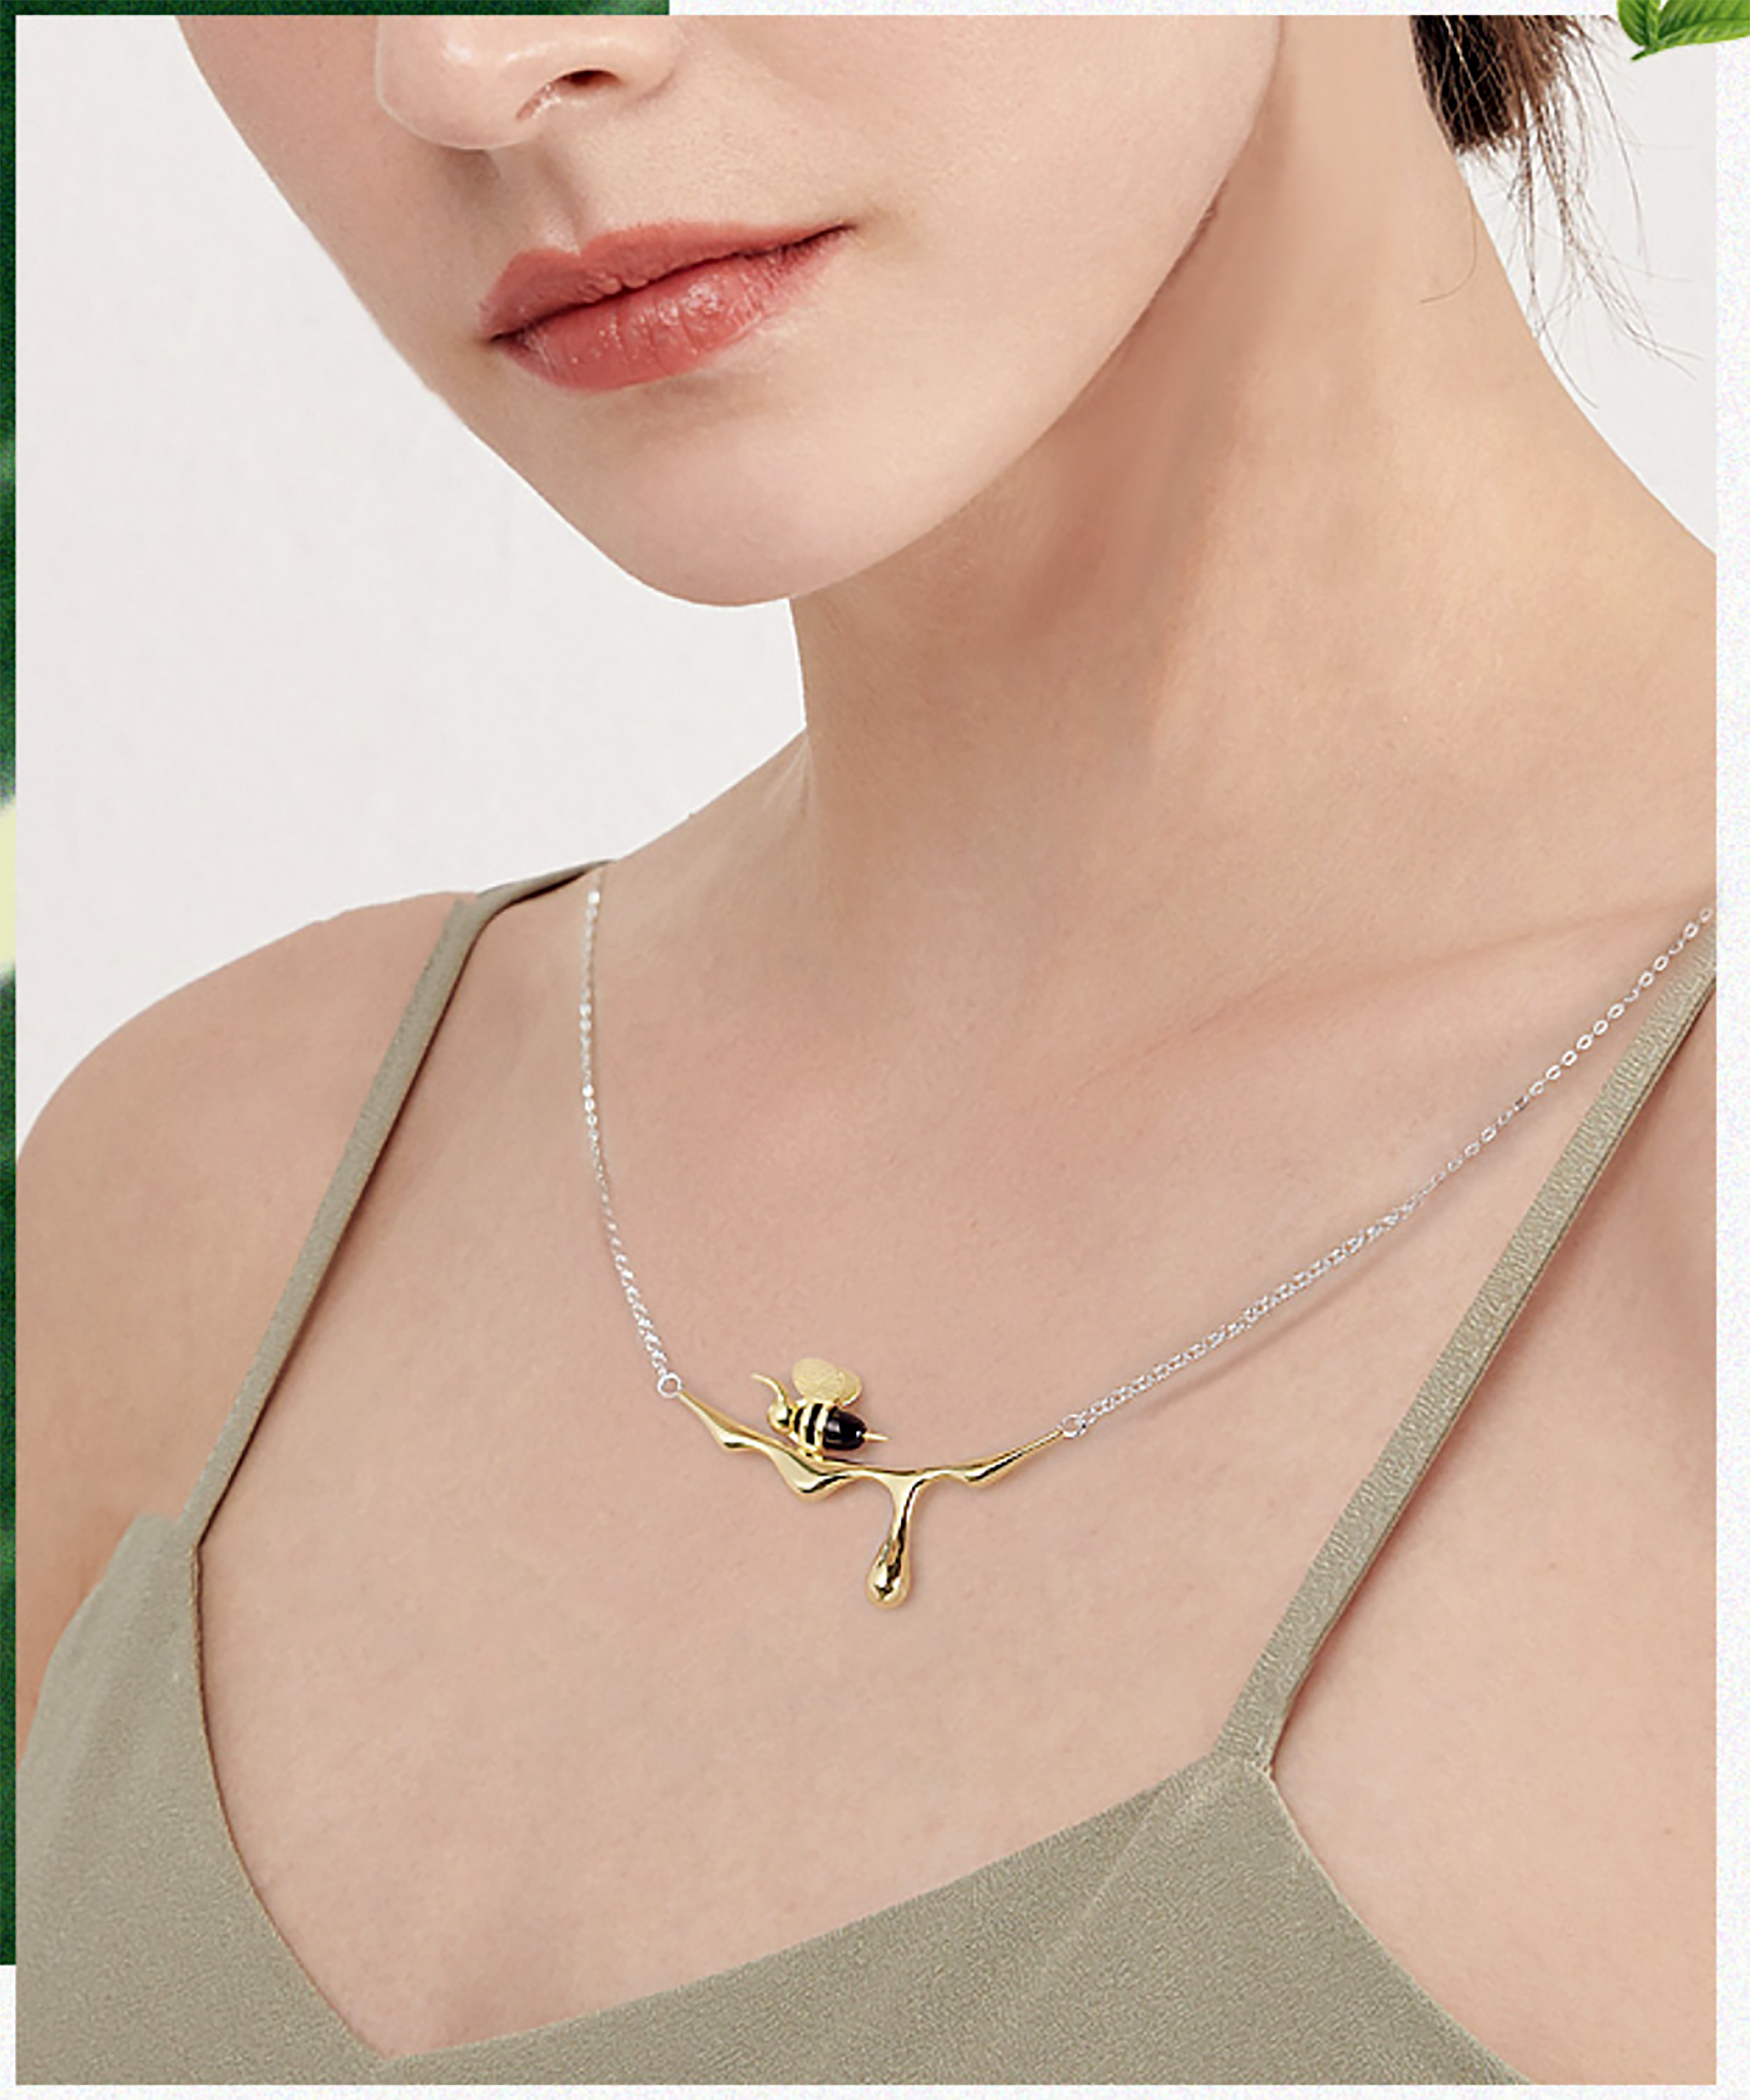 Model Wearing Honey Bee With Dripping Honey Necklace